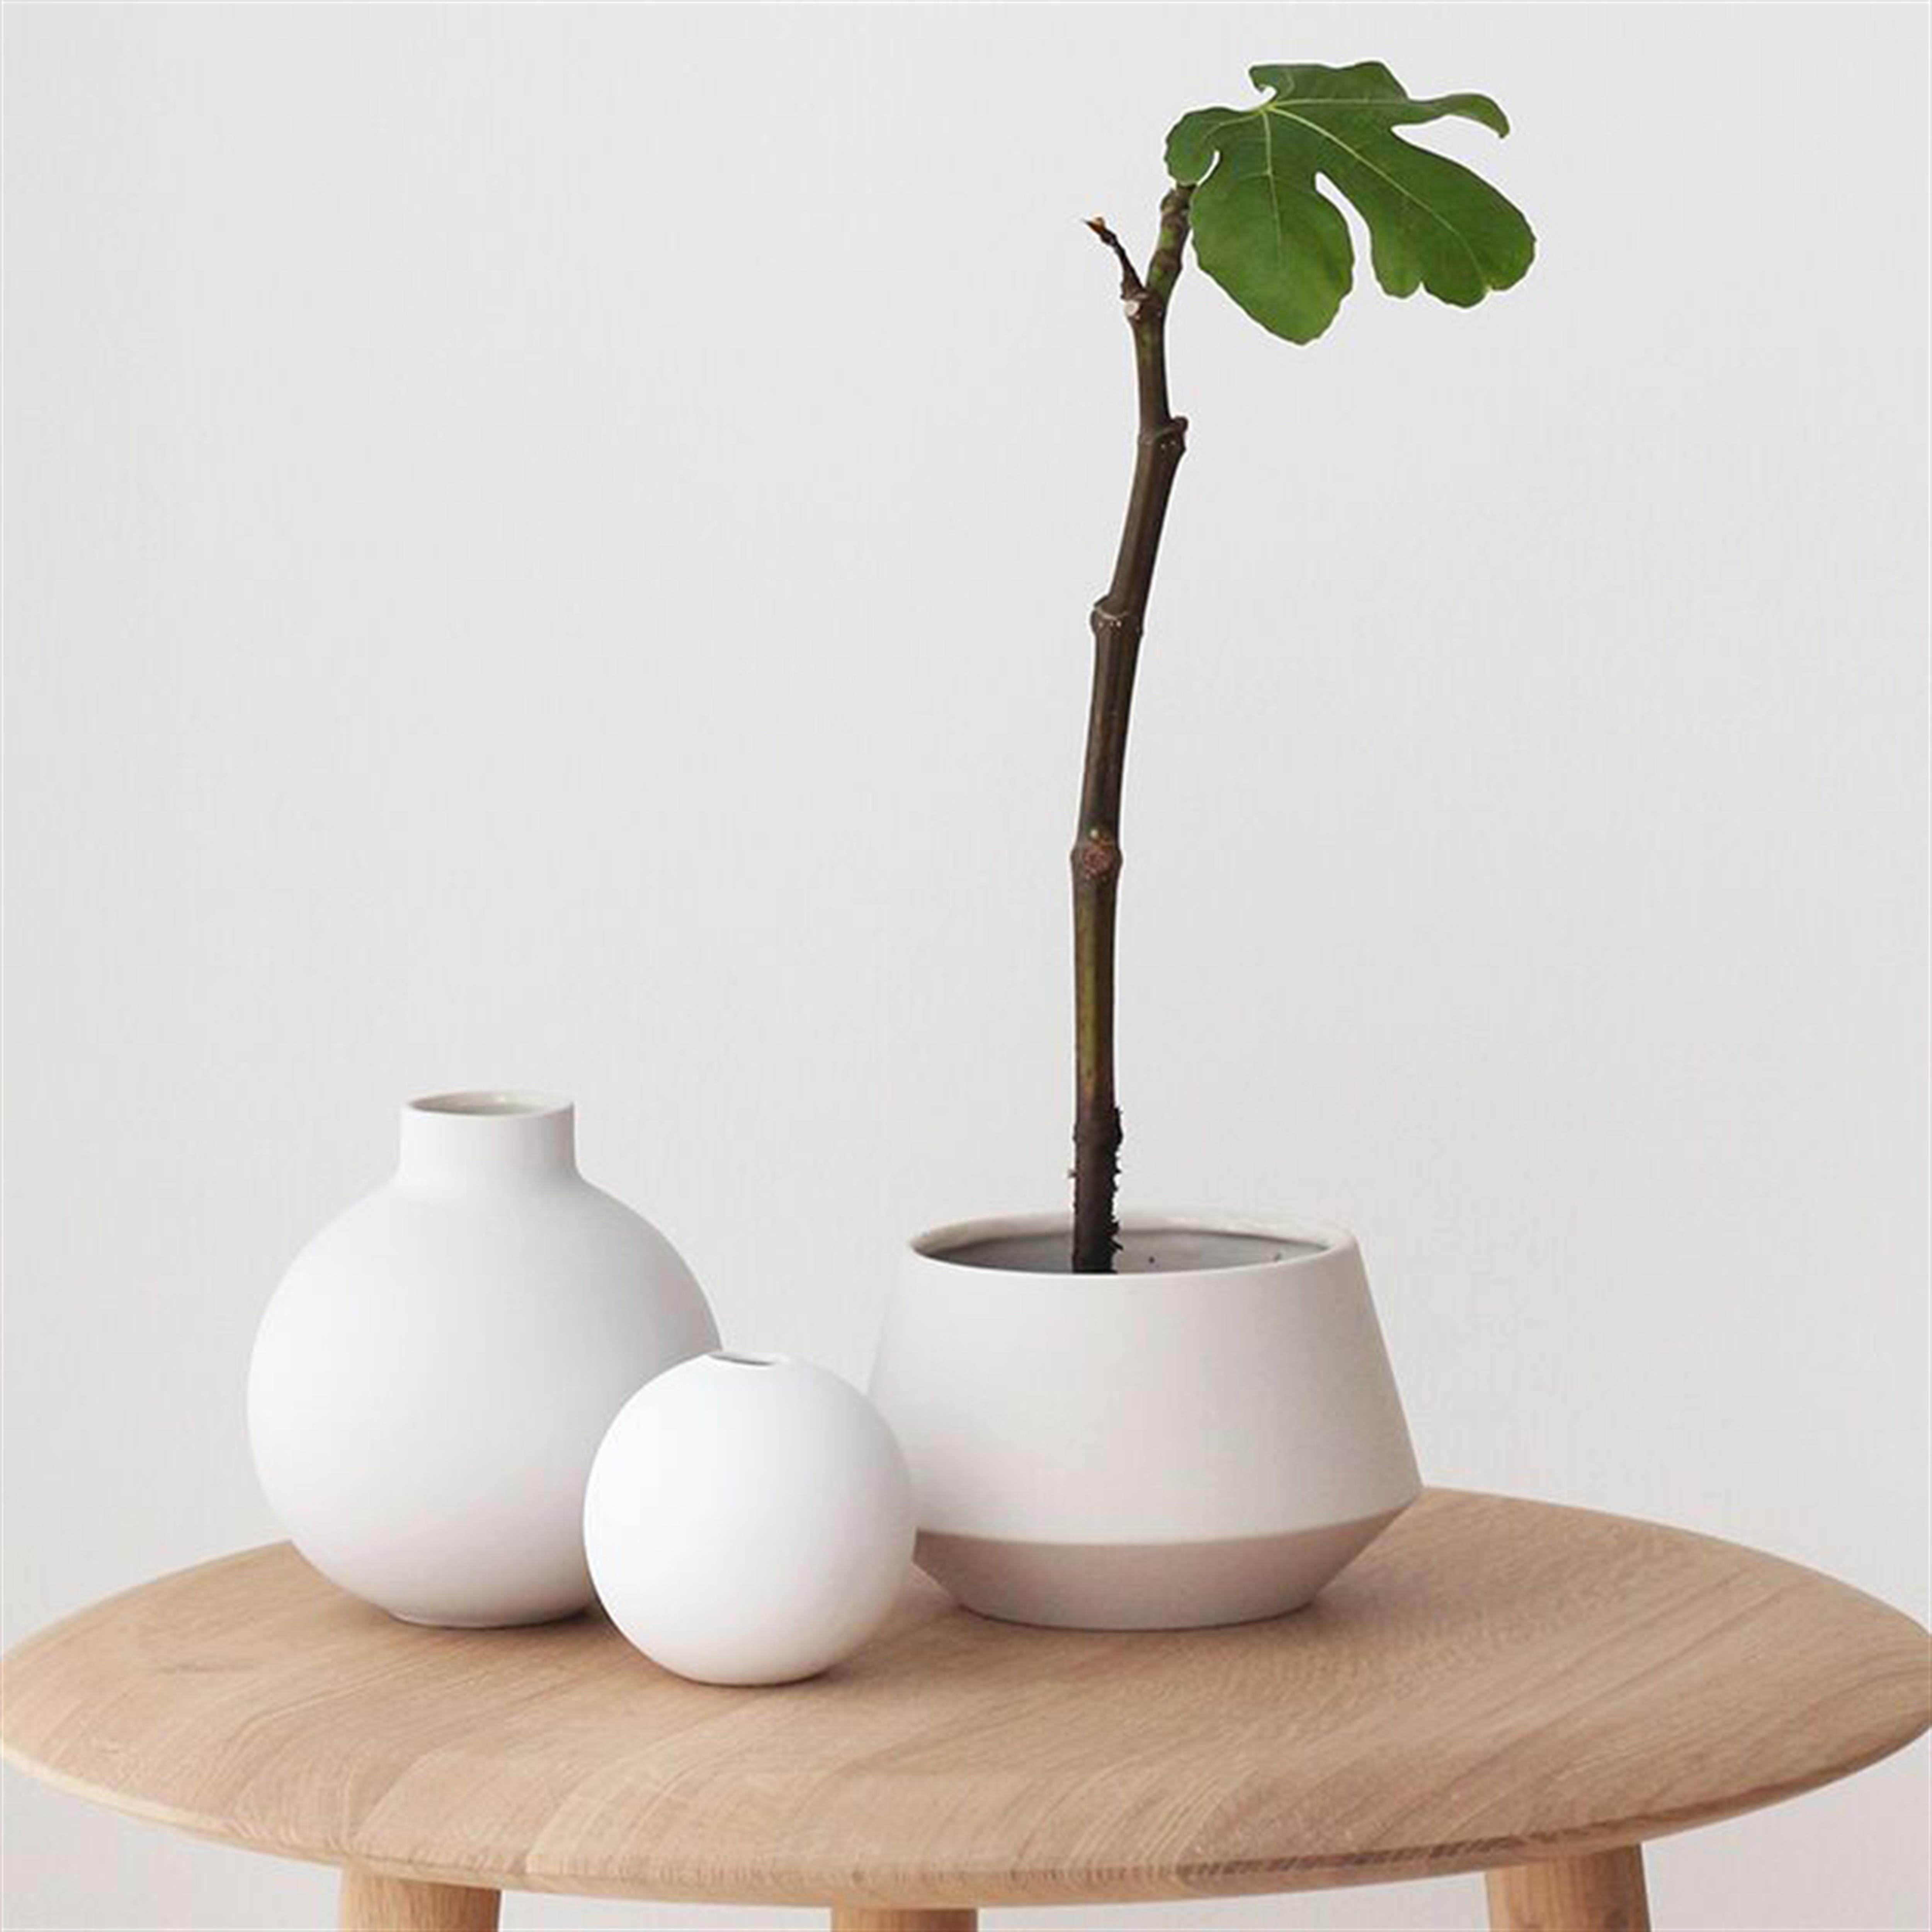 Ball vase white from Cooee Design - NordicNest.com